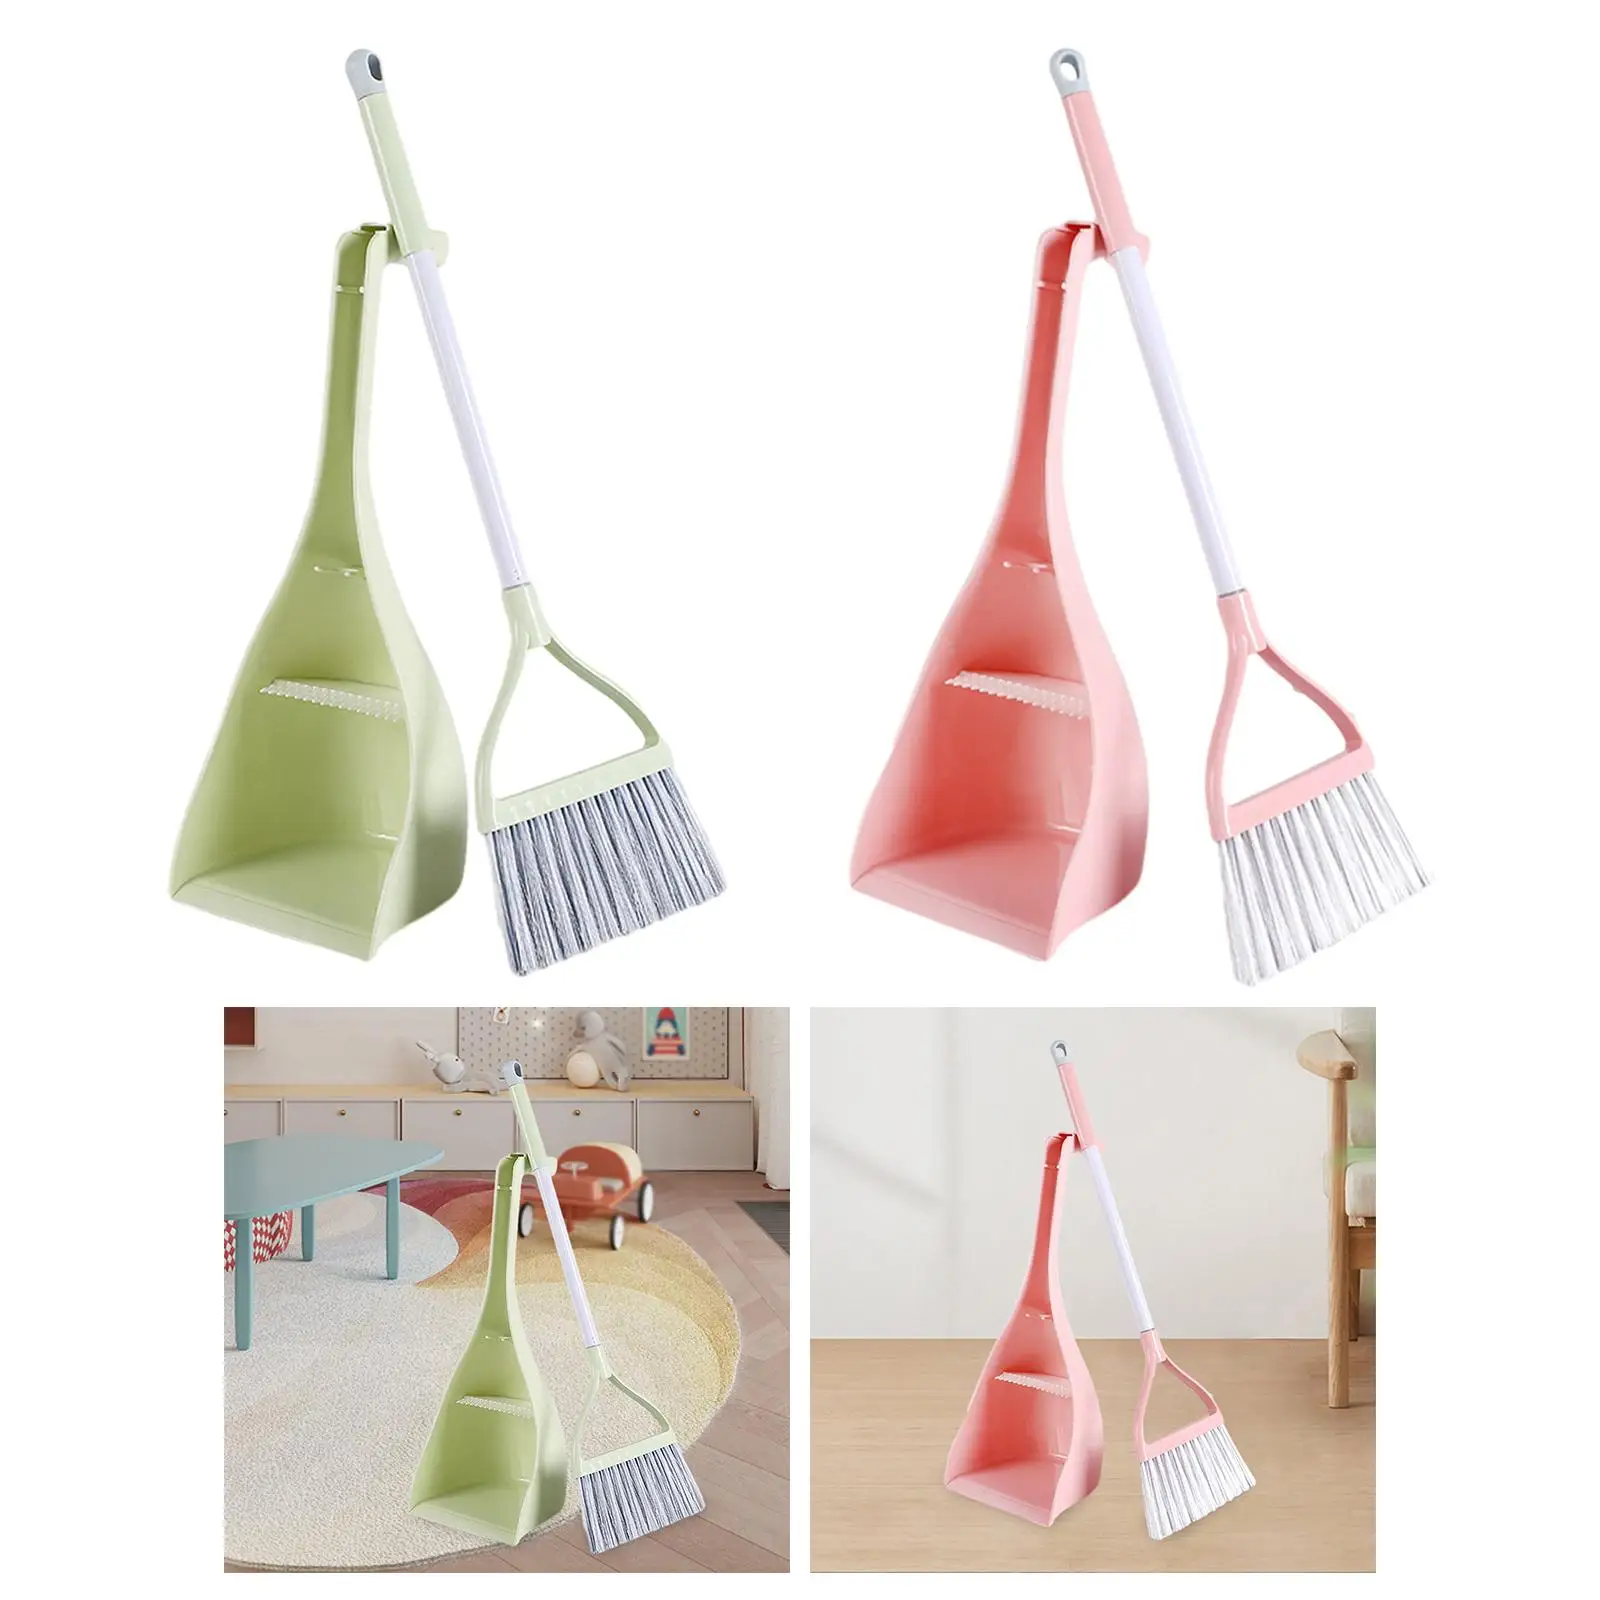 Kids Broom Set Role Playing Holiday Gifts Mini Broom with Dustpan for Preschool Kindergarten Ages 3-6 Years Old Boys Girls